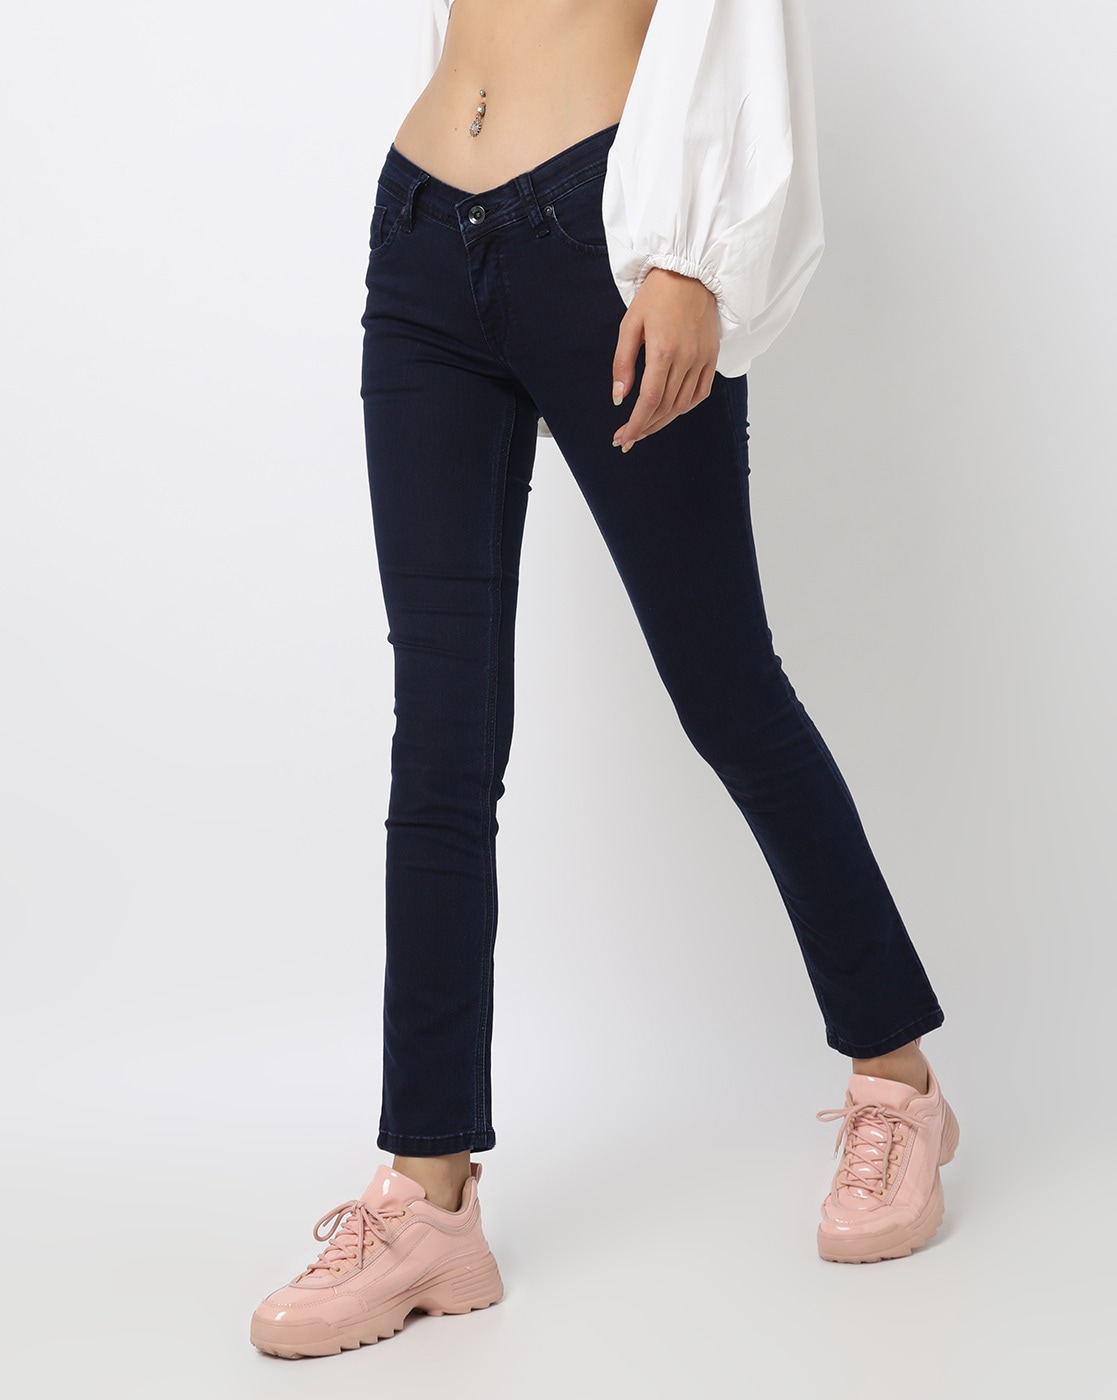 low rise relaxed fit jeans